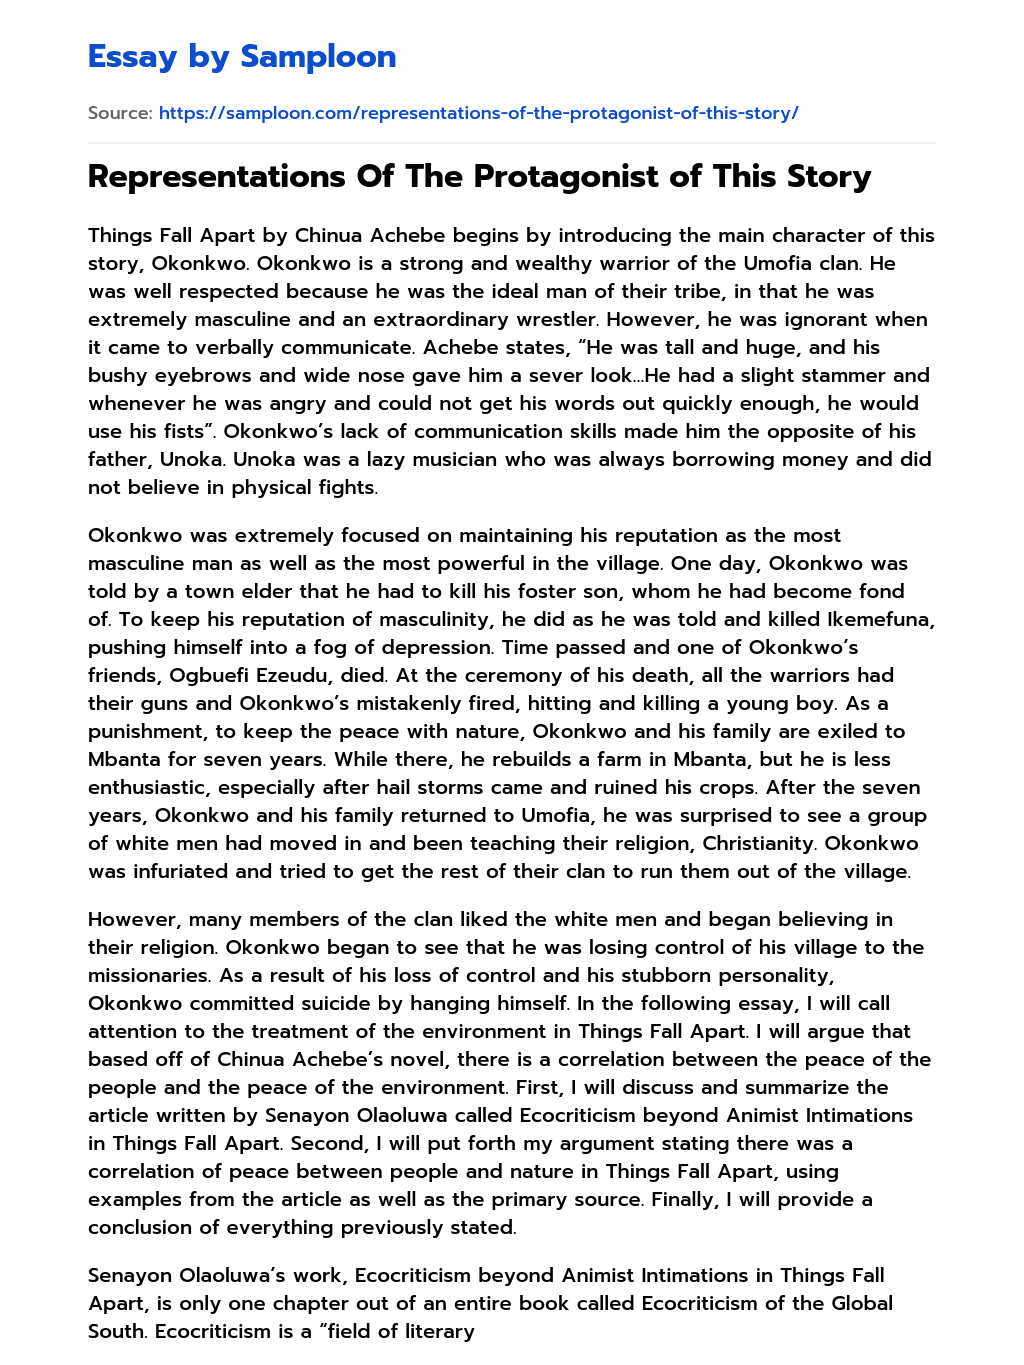 Representations Of The Protagonist of This Story Personal Essay essay